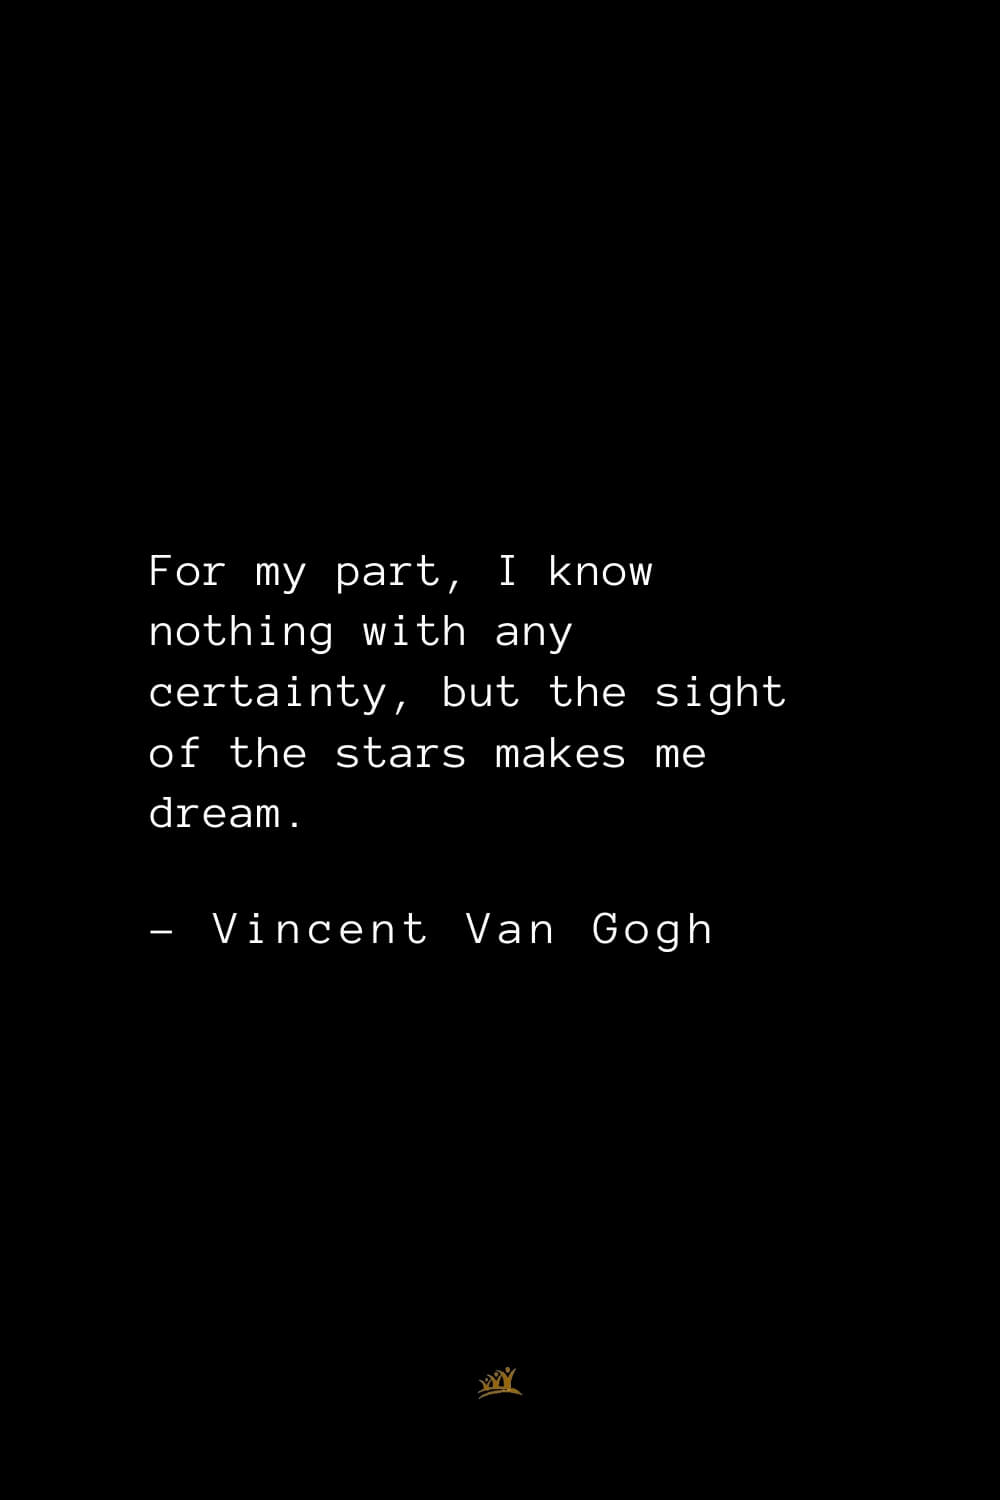 Top 34 Vincent Van Gogh Quotes about Life, Love, and Art